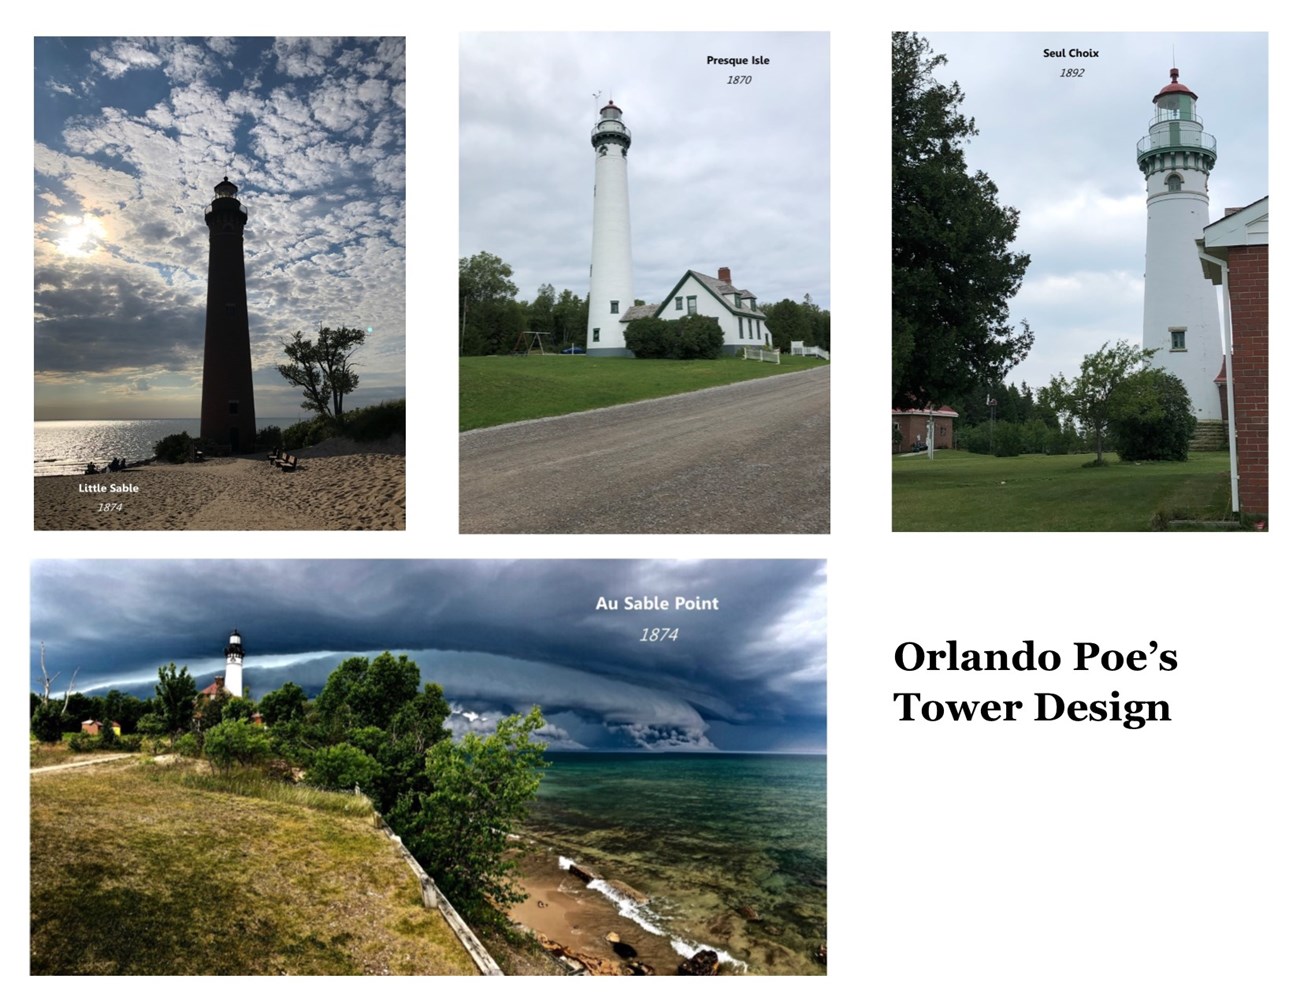 Four lighthouse photographs displaying towers built from the Orlando Poe engineering design.